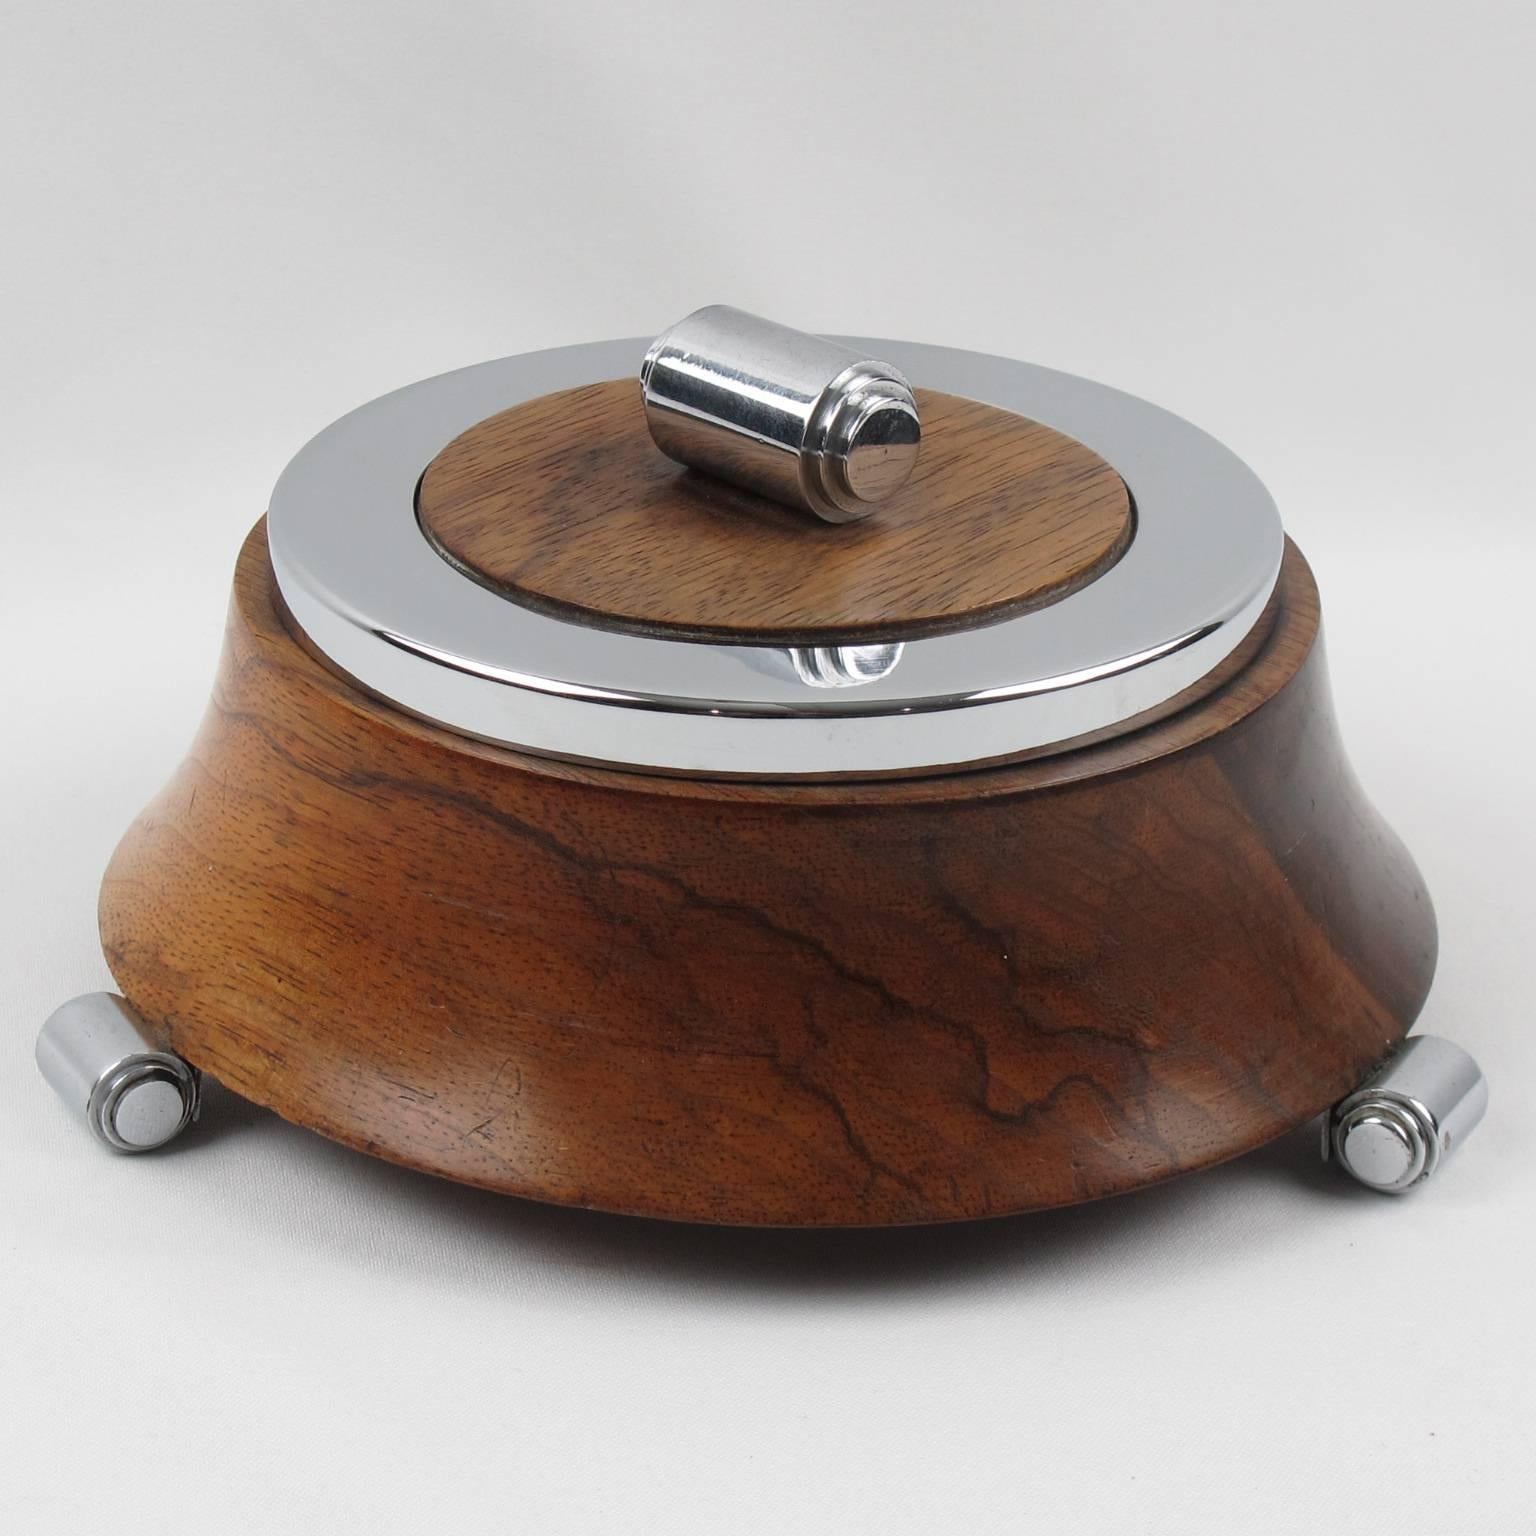 Elegant vintage French Art Deco decorative lidded box, probably a jewelry box. Rounded design with chromed metal lid, finial and tiny feet, body in walnut with carved shape. Interior with beige velvet liner, circa 1930s. Very good vintage